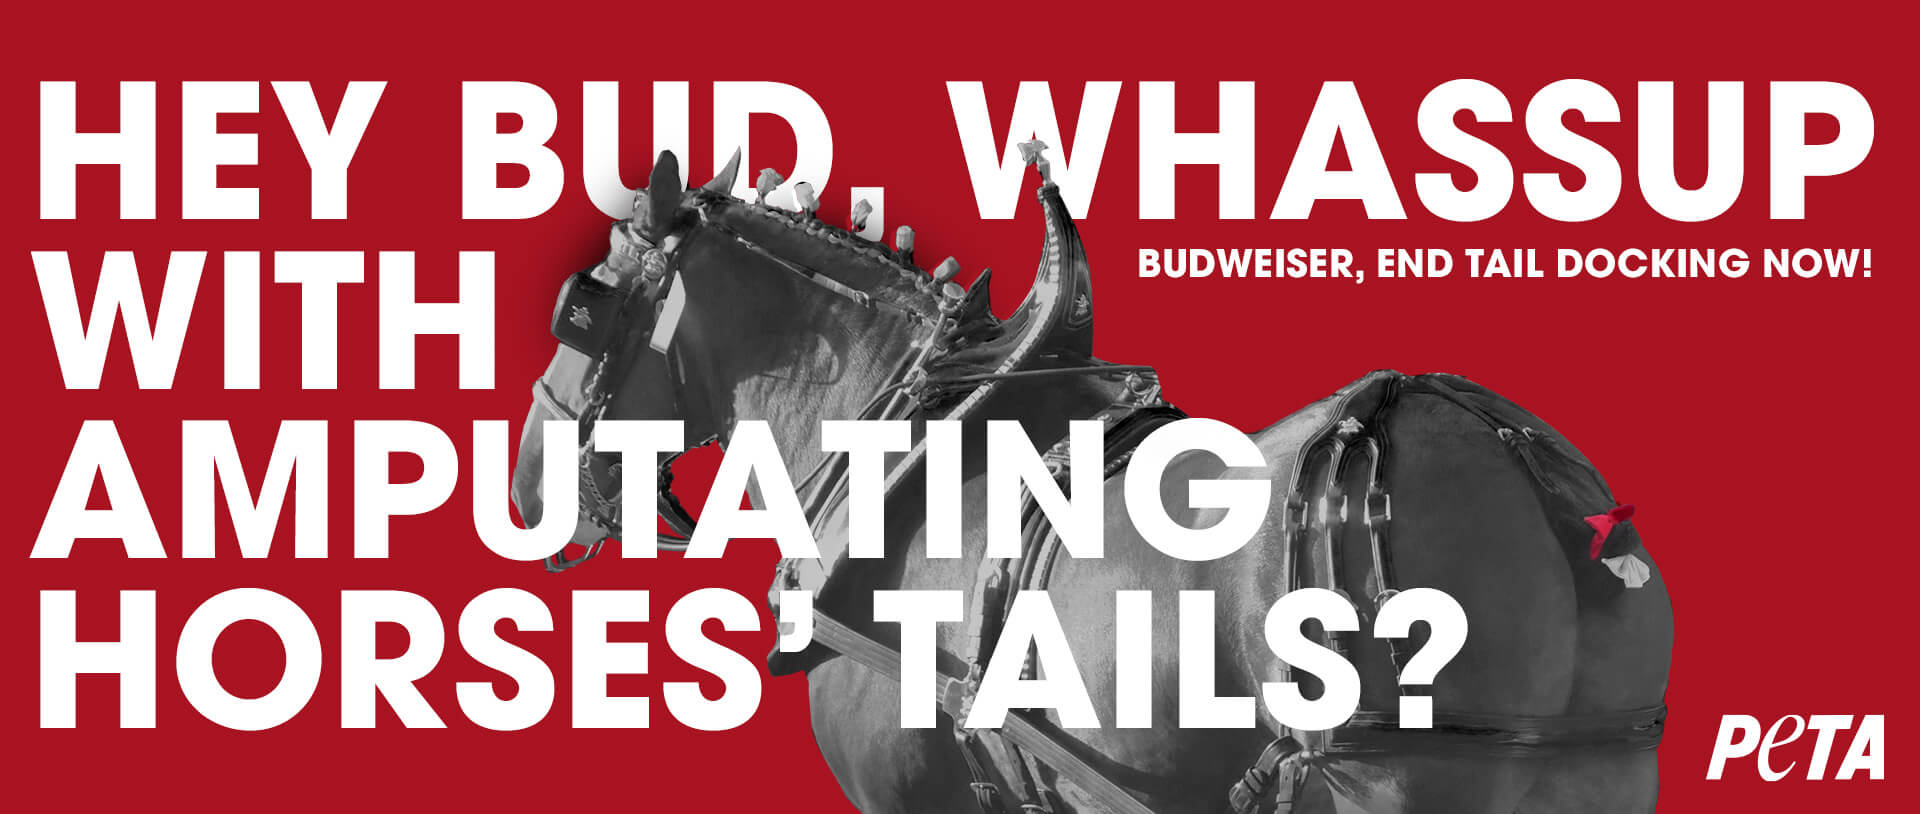 PETA Billboard that says "Hey bud, whassup with amputating horses tails?"